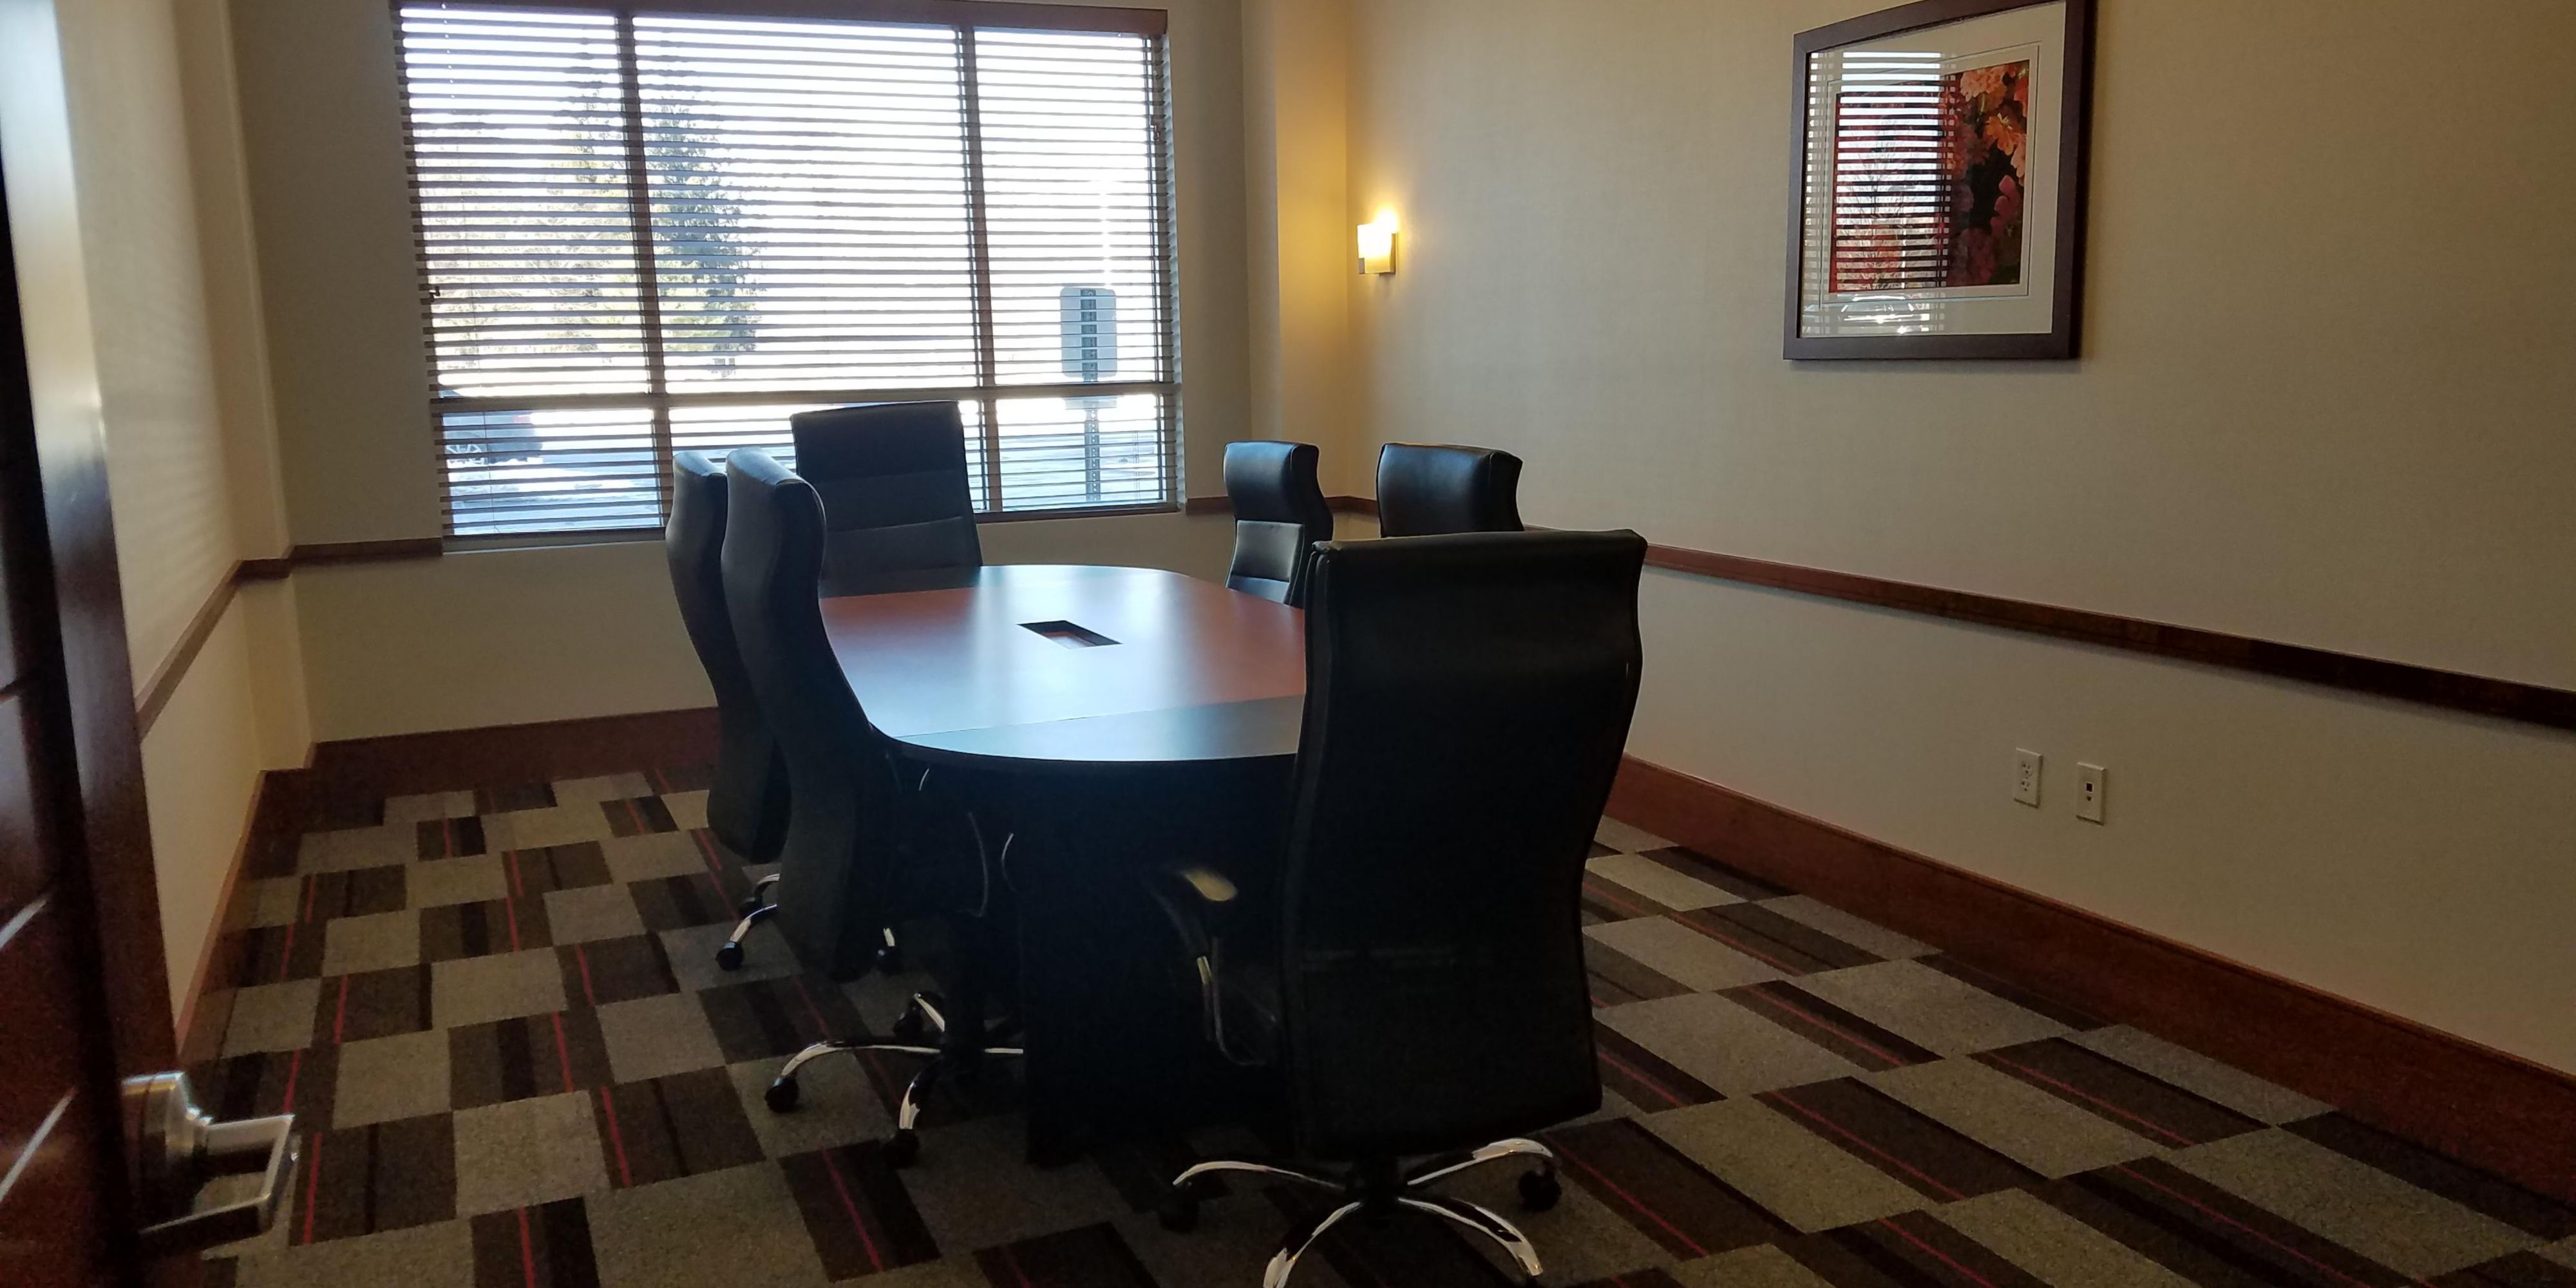 We offer three meeting rooms to accommodate boardroom or larger general session events. With our courteous agreement we make booking space easy. We offer Food and Beverage and AV packages to meet your required needs.